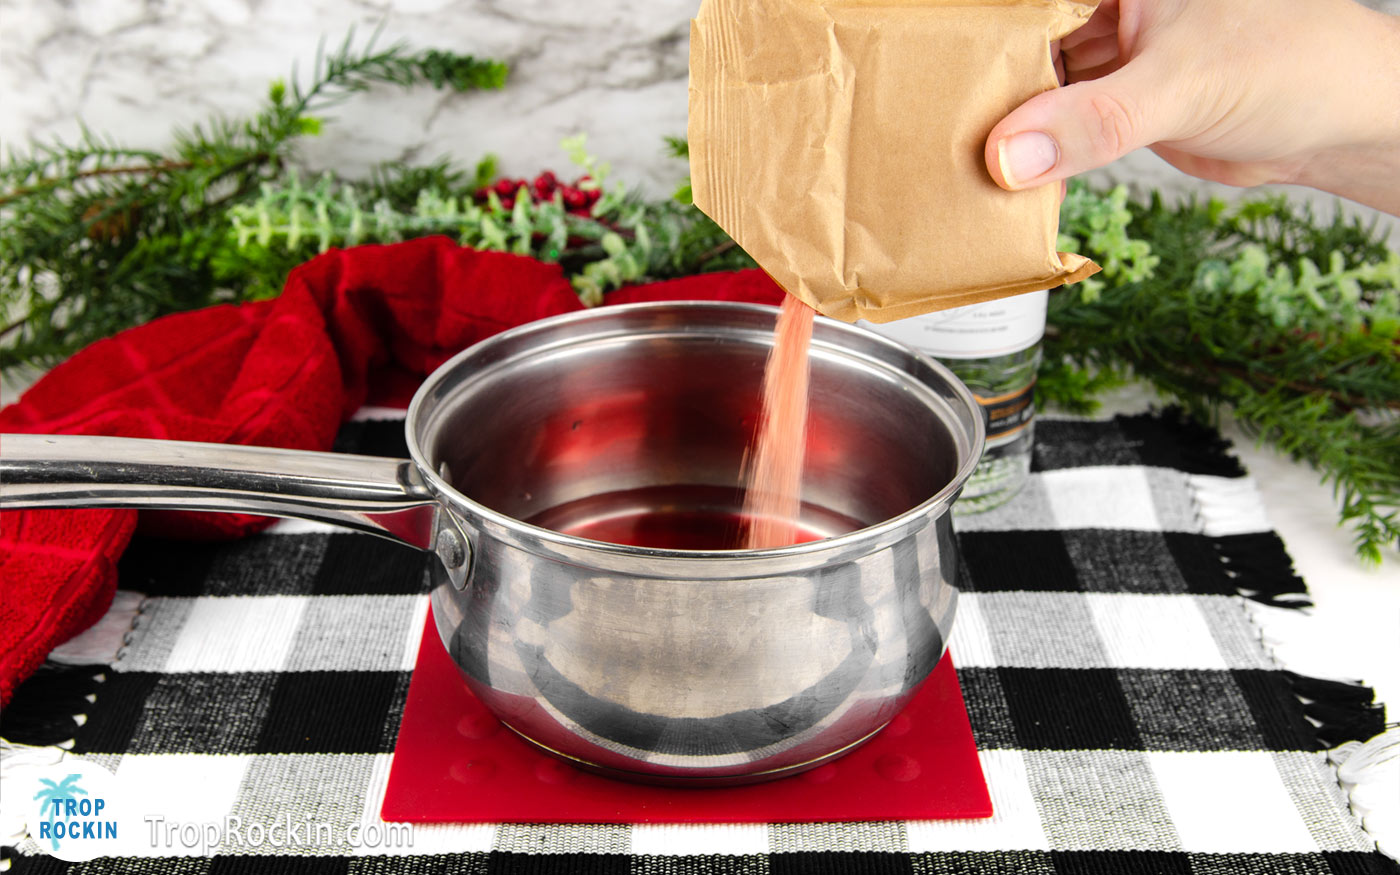 Pouring a package of jello into saucepan filled with hot water.